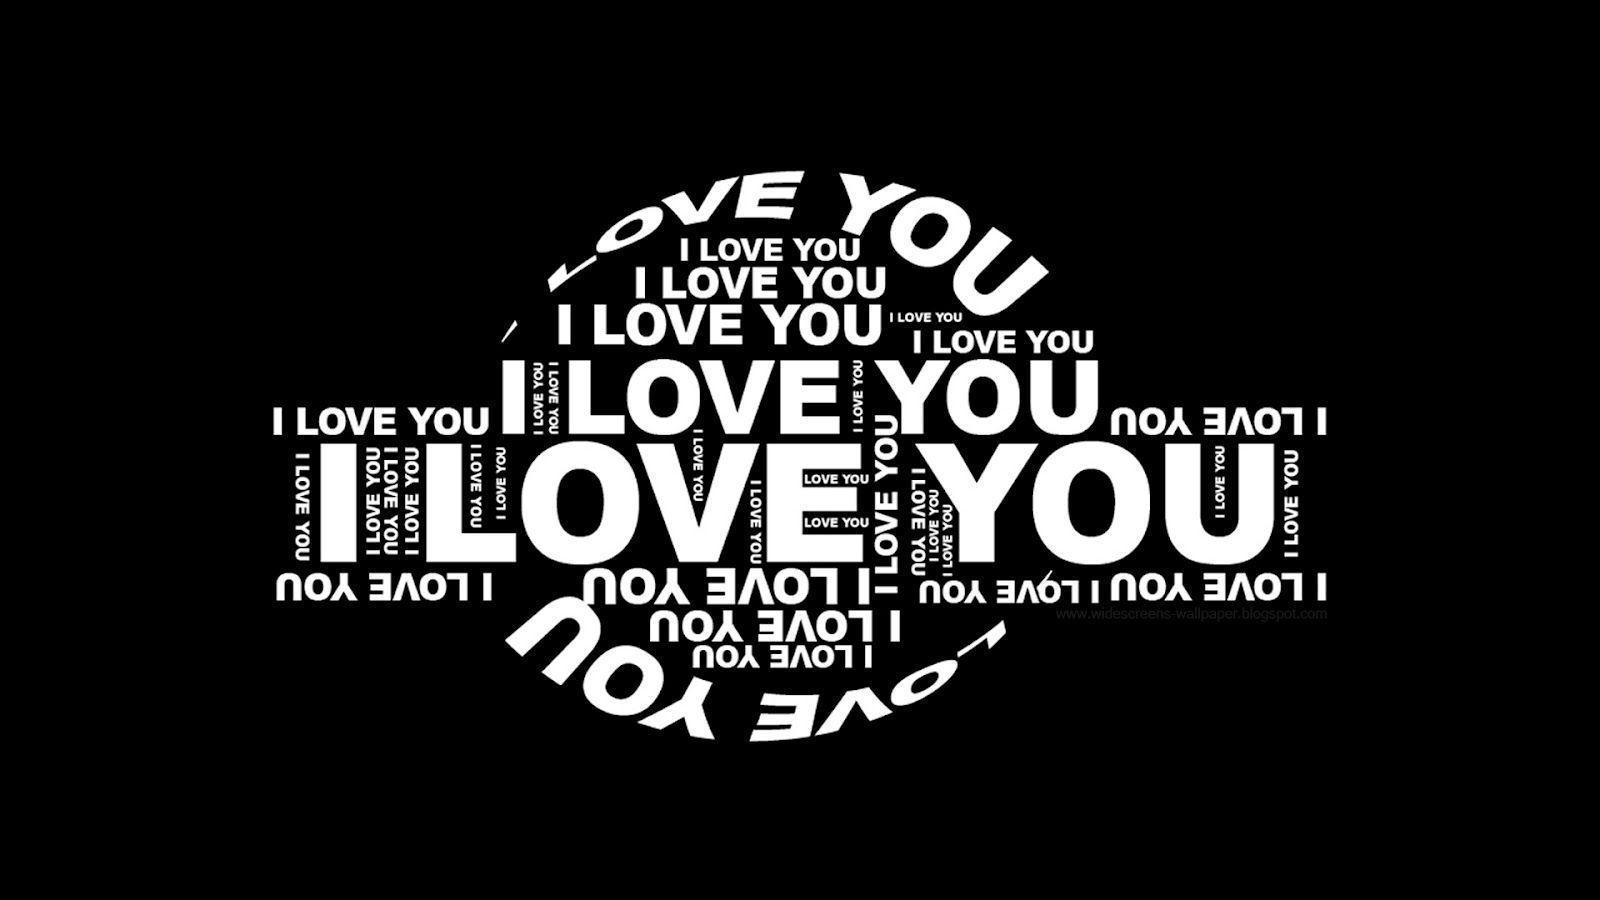 I Love You Image Wallpaper Download Wallpaper from HD Wallpaper